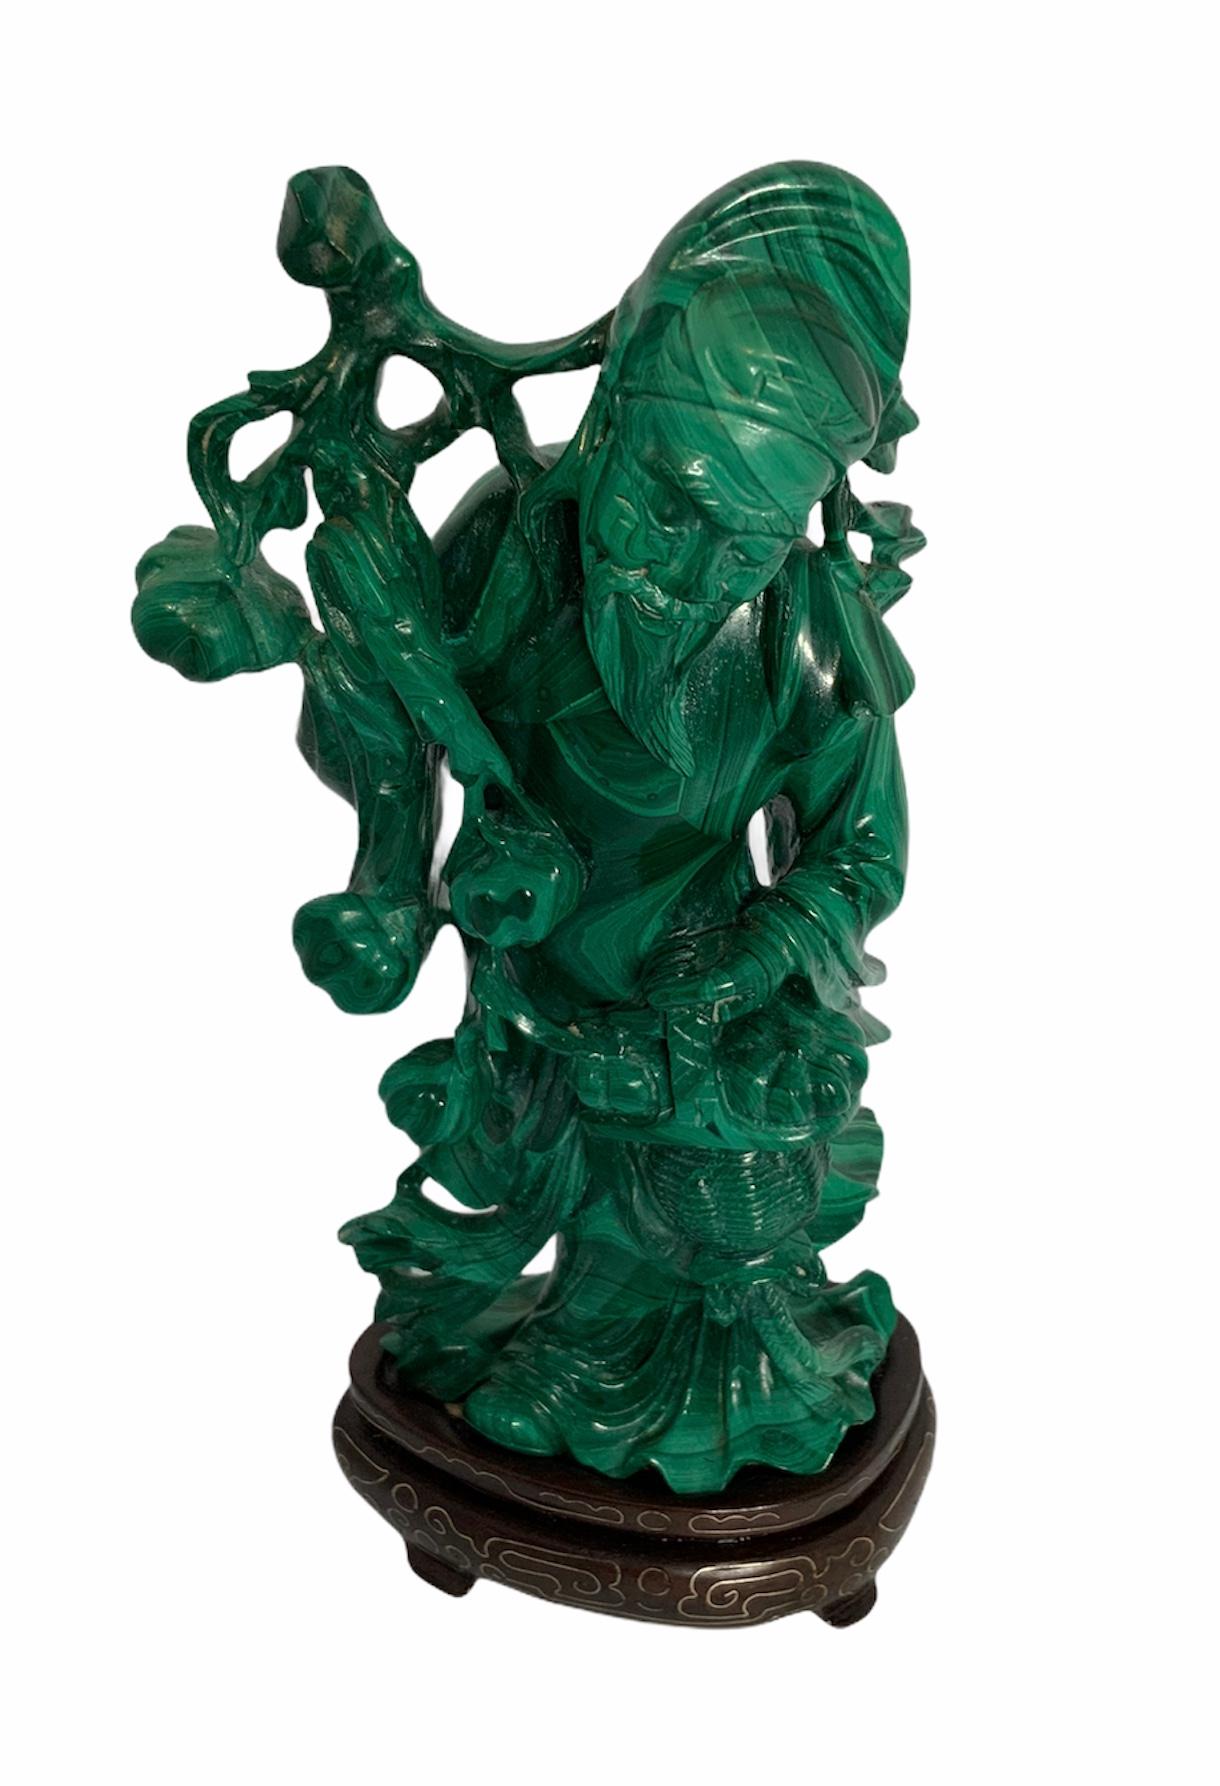 Chinese Export Hand Carved Malachite Statue of Shou Xing Gong